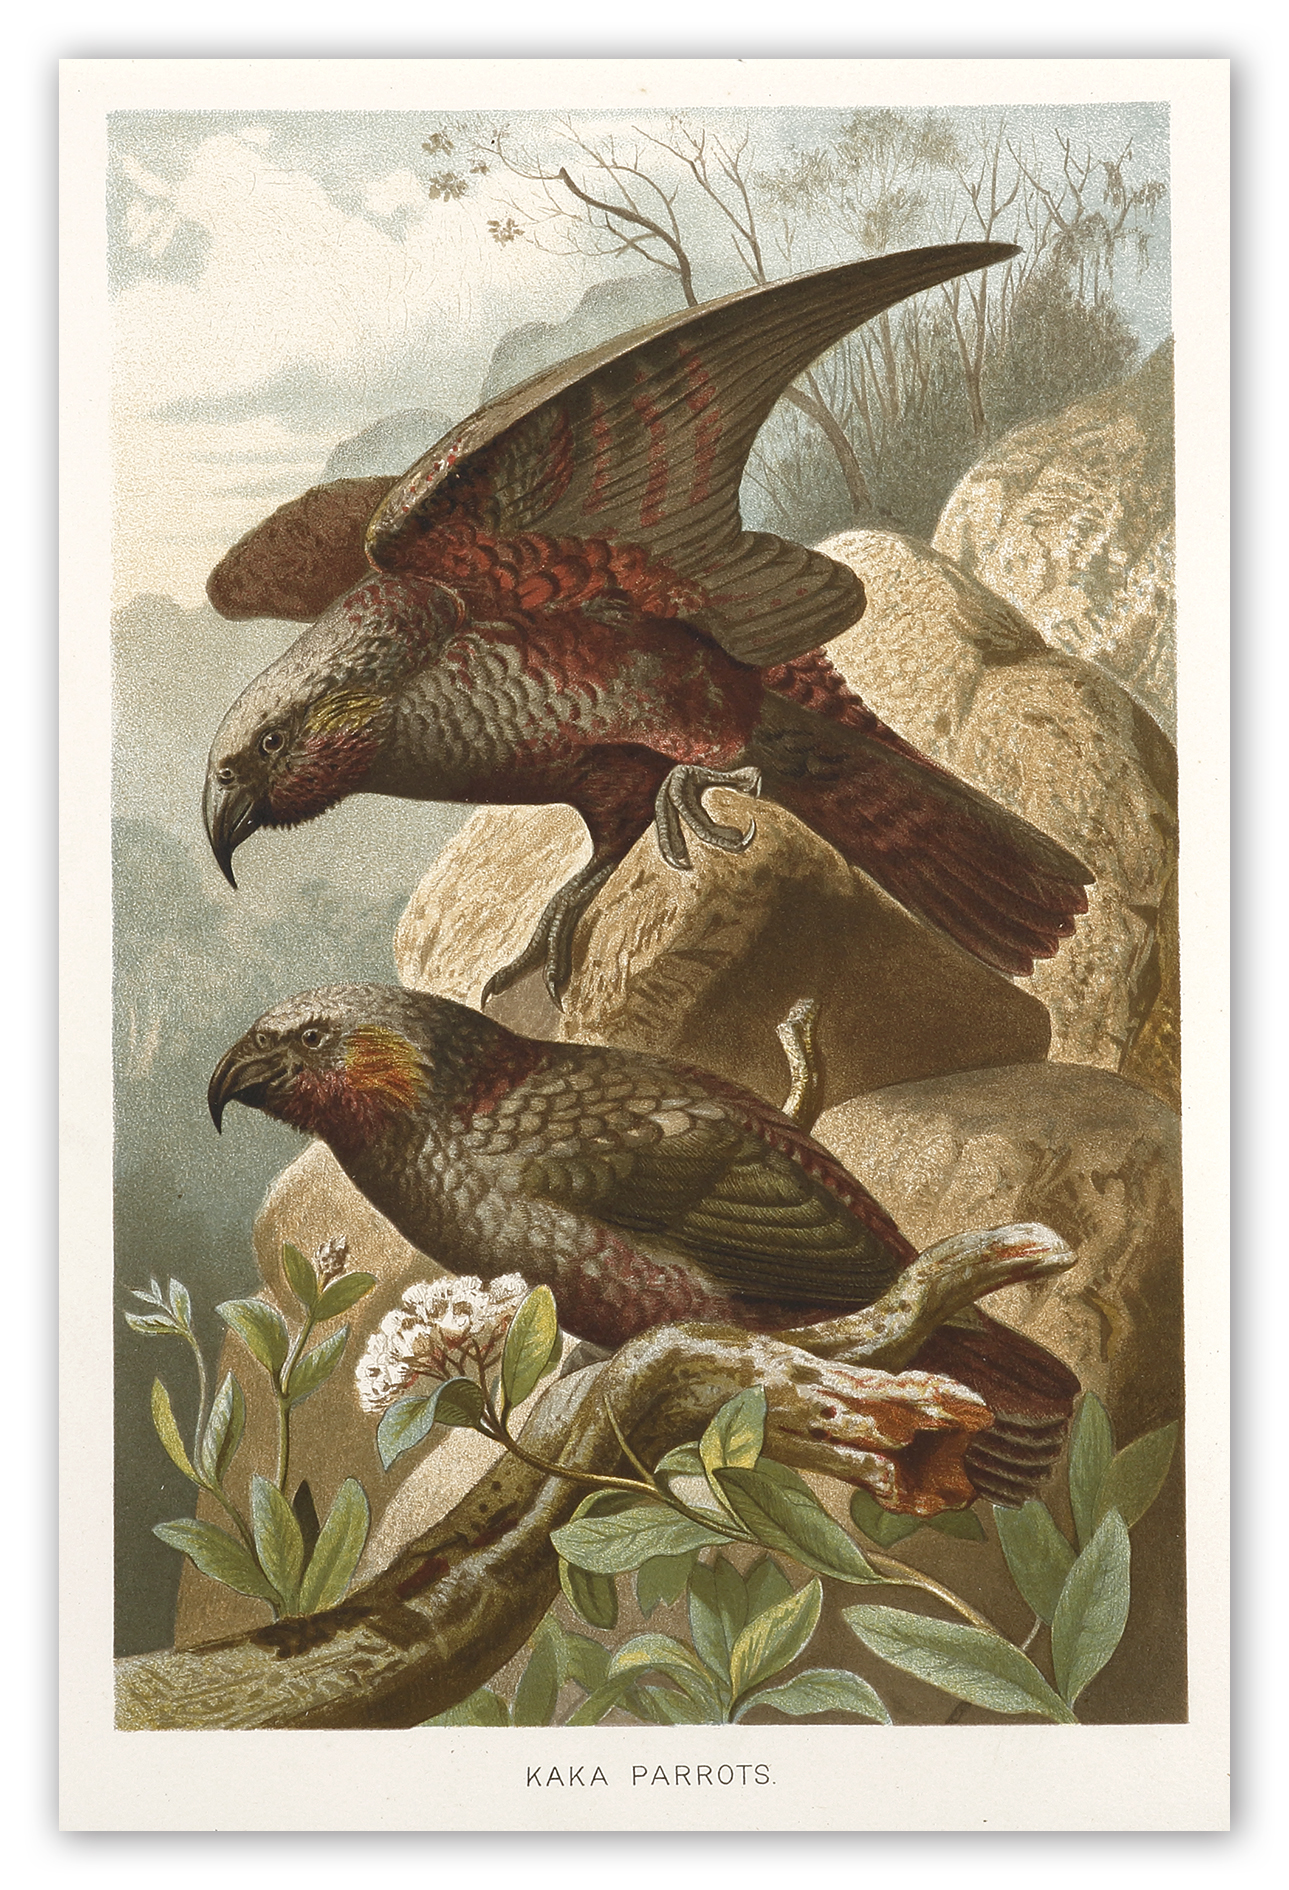 Kaka Parrots. - Antique Print from 1893